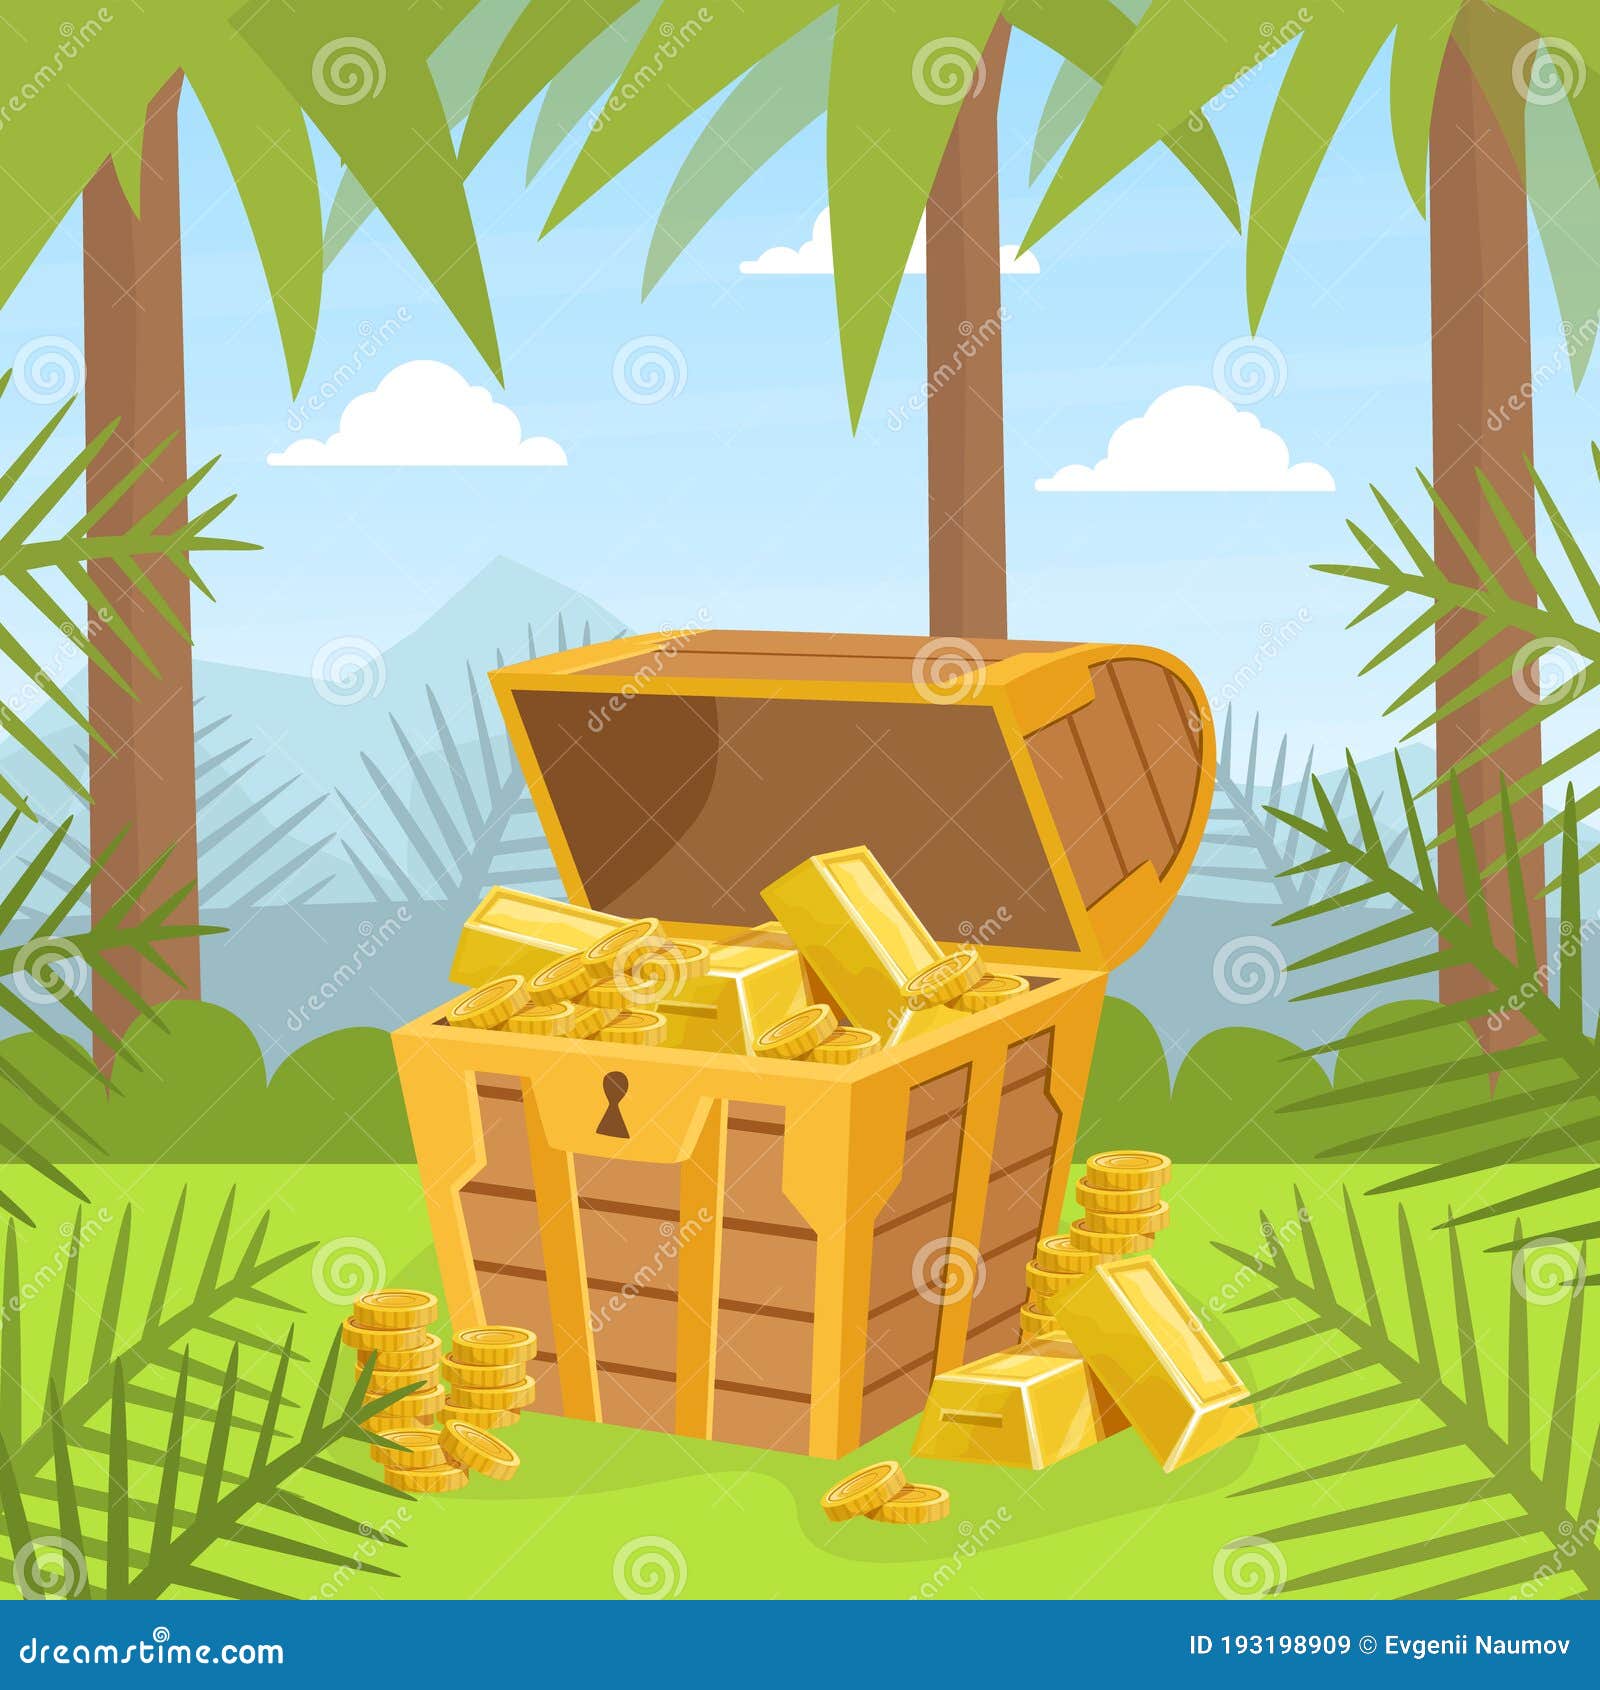 Wooden Ancient Chest of Gold on Tropical Island, Lost Pirate Treasures ...